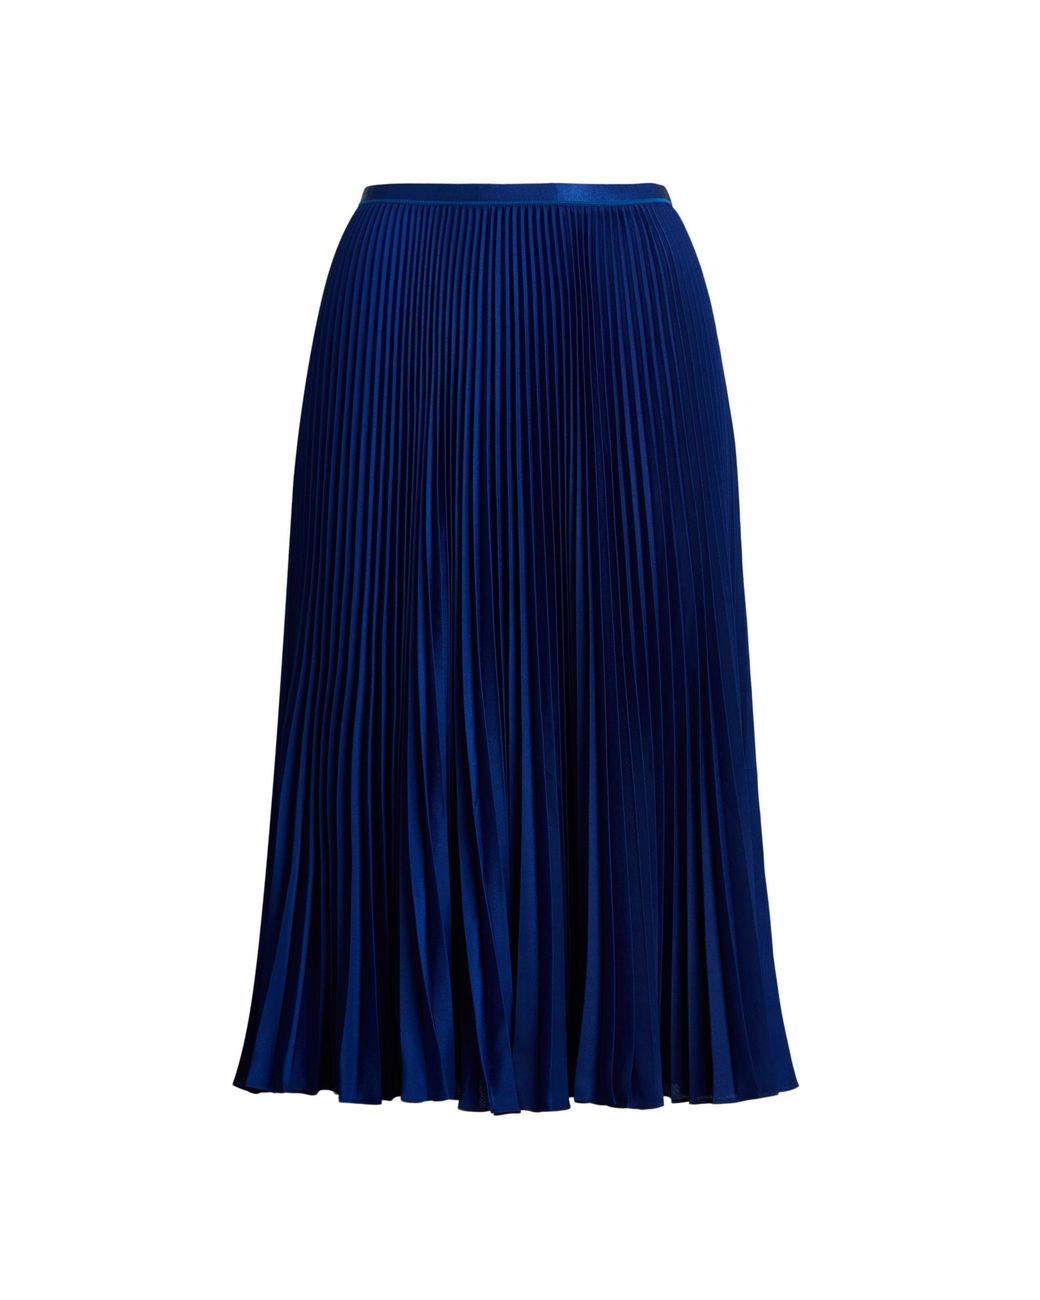 Polo Ralph Lauren Synthetic Pleated Midi Skirt in Blue - Lyst